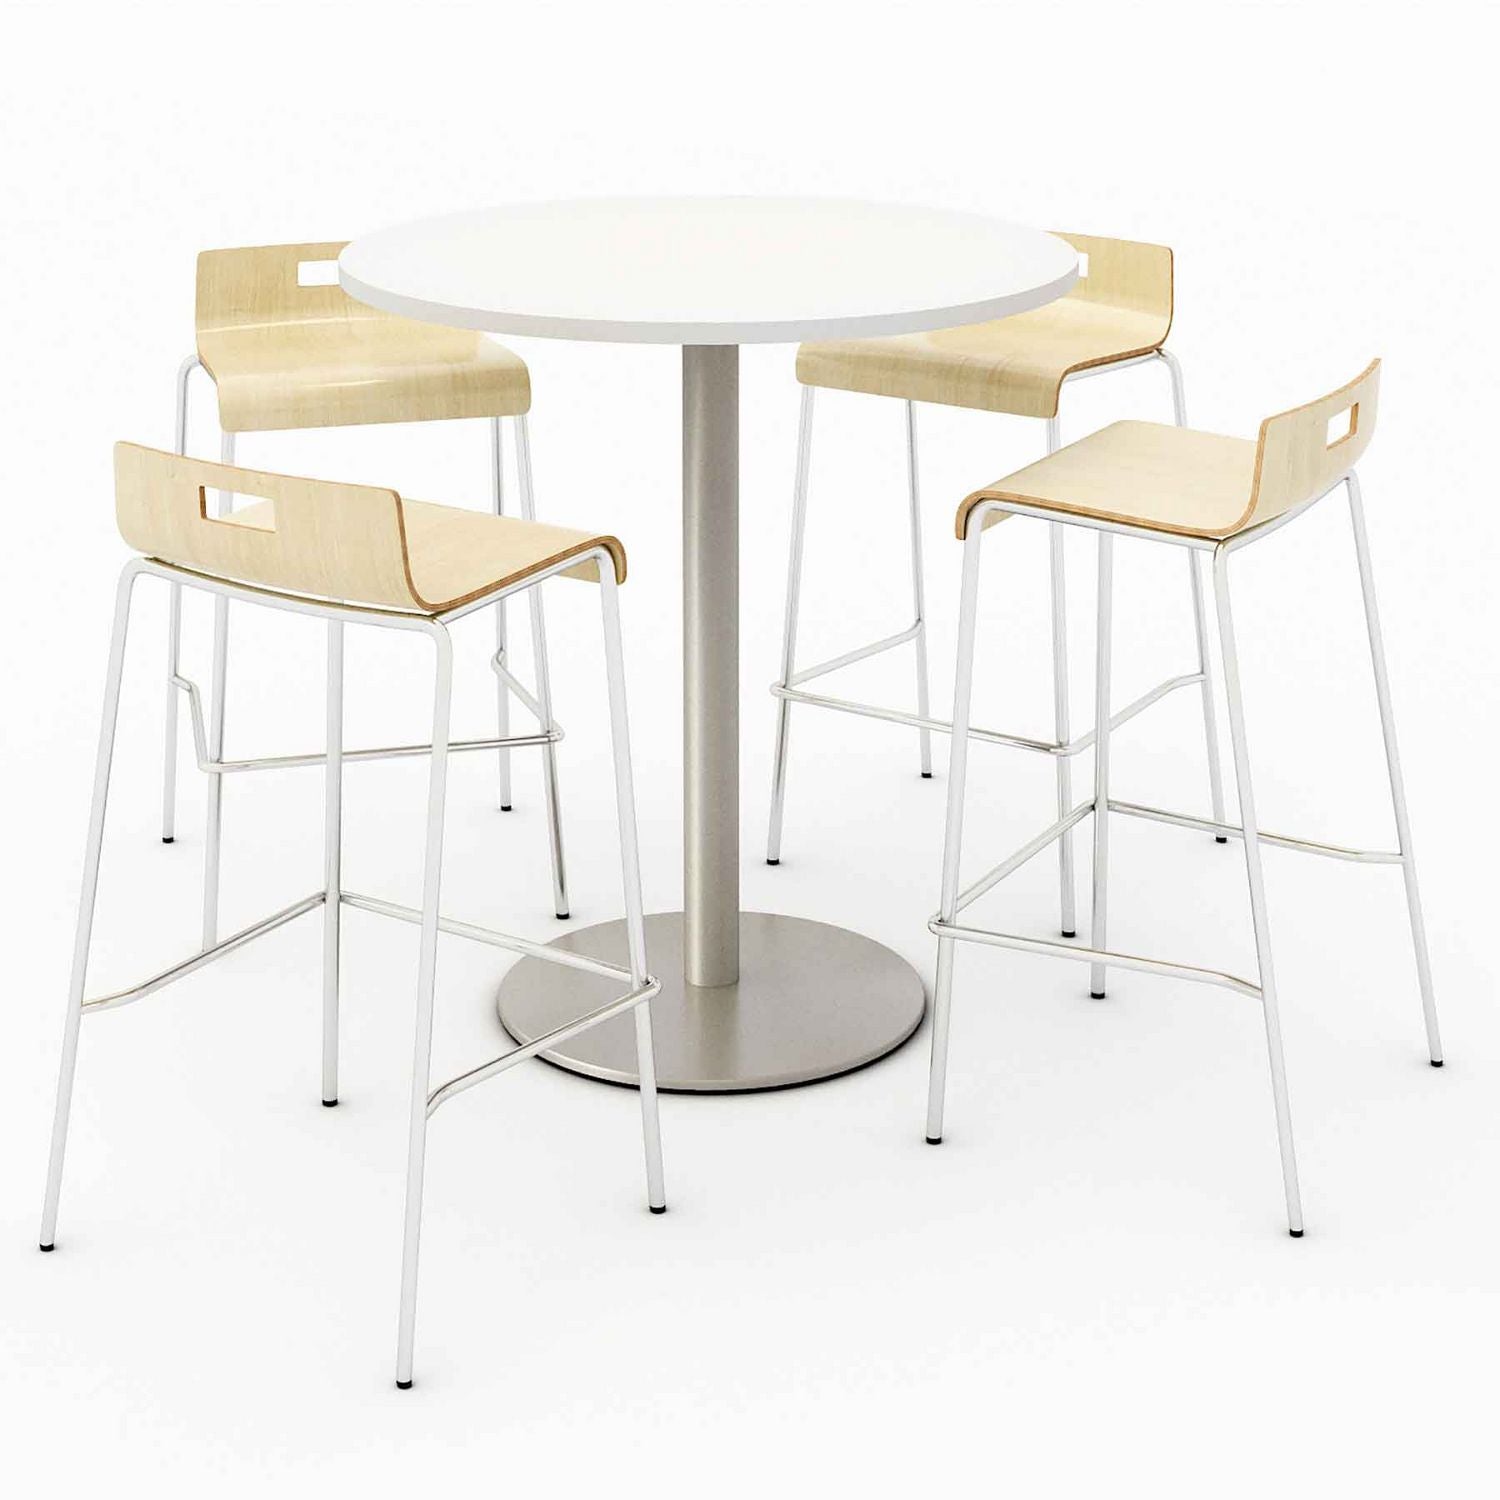 pedestal-bistro-table-with-four-natural-jive-series-barstools-round-36-dia-x-41h-designer-white-ships-in-4-6-bus-days_kfi840031900104 - 1